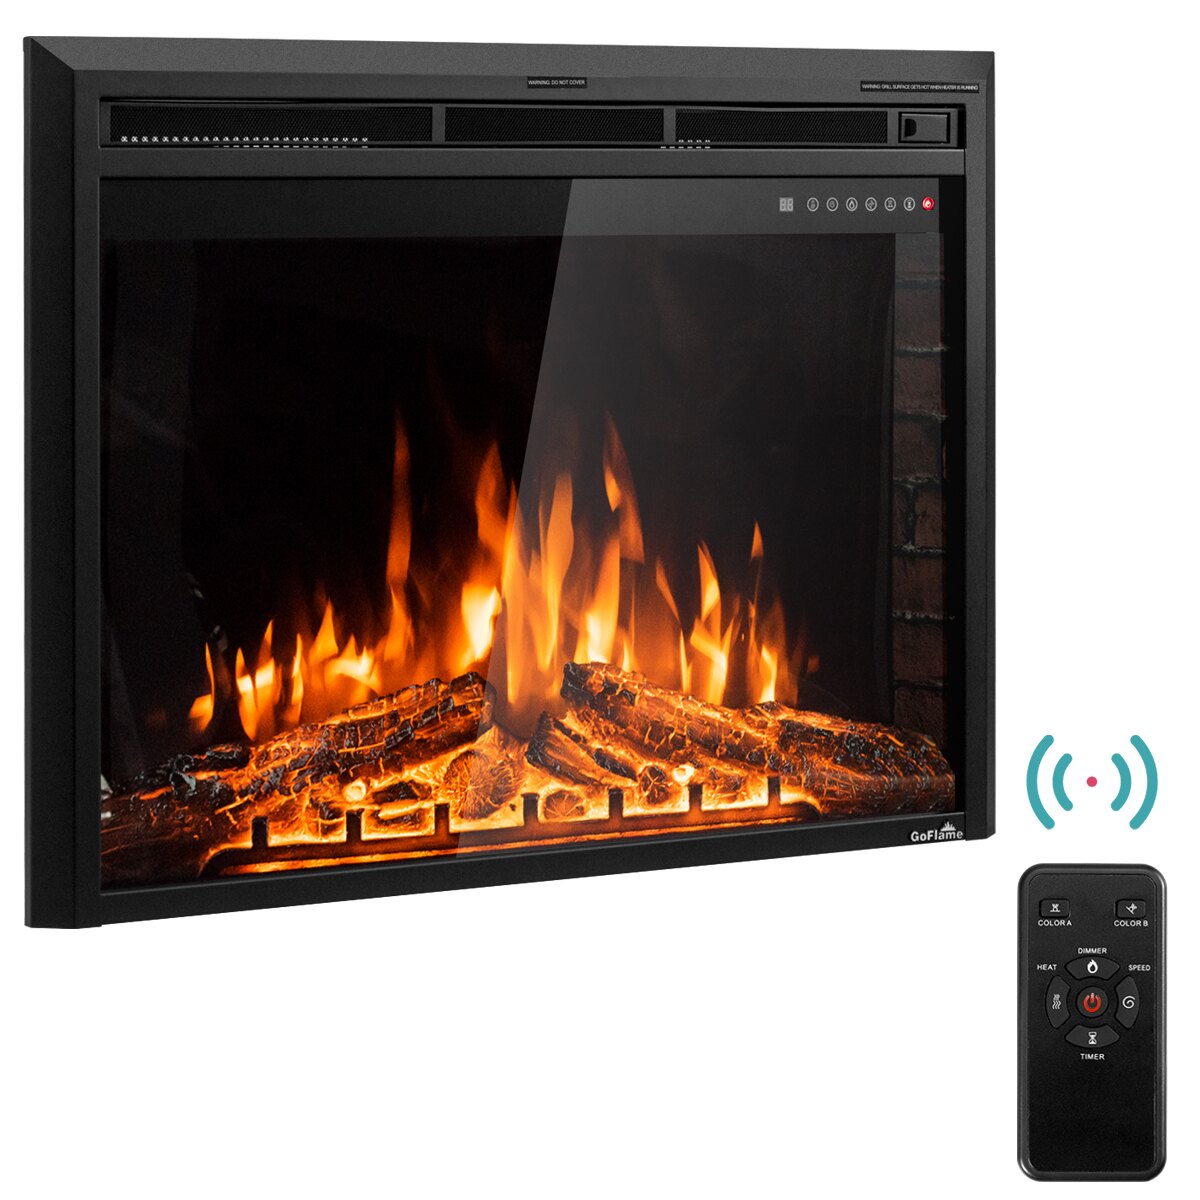 50 Inch Electric Fireplace Insert Unique Goflame 36 750w 1500w Fireplace Heater Electric Embedded Insert Timer Flame Remote